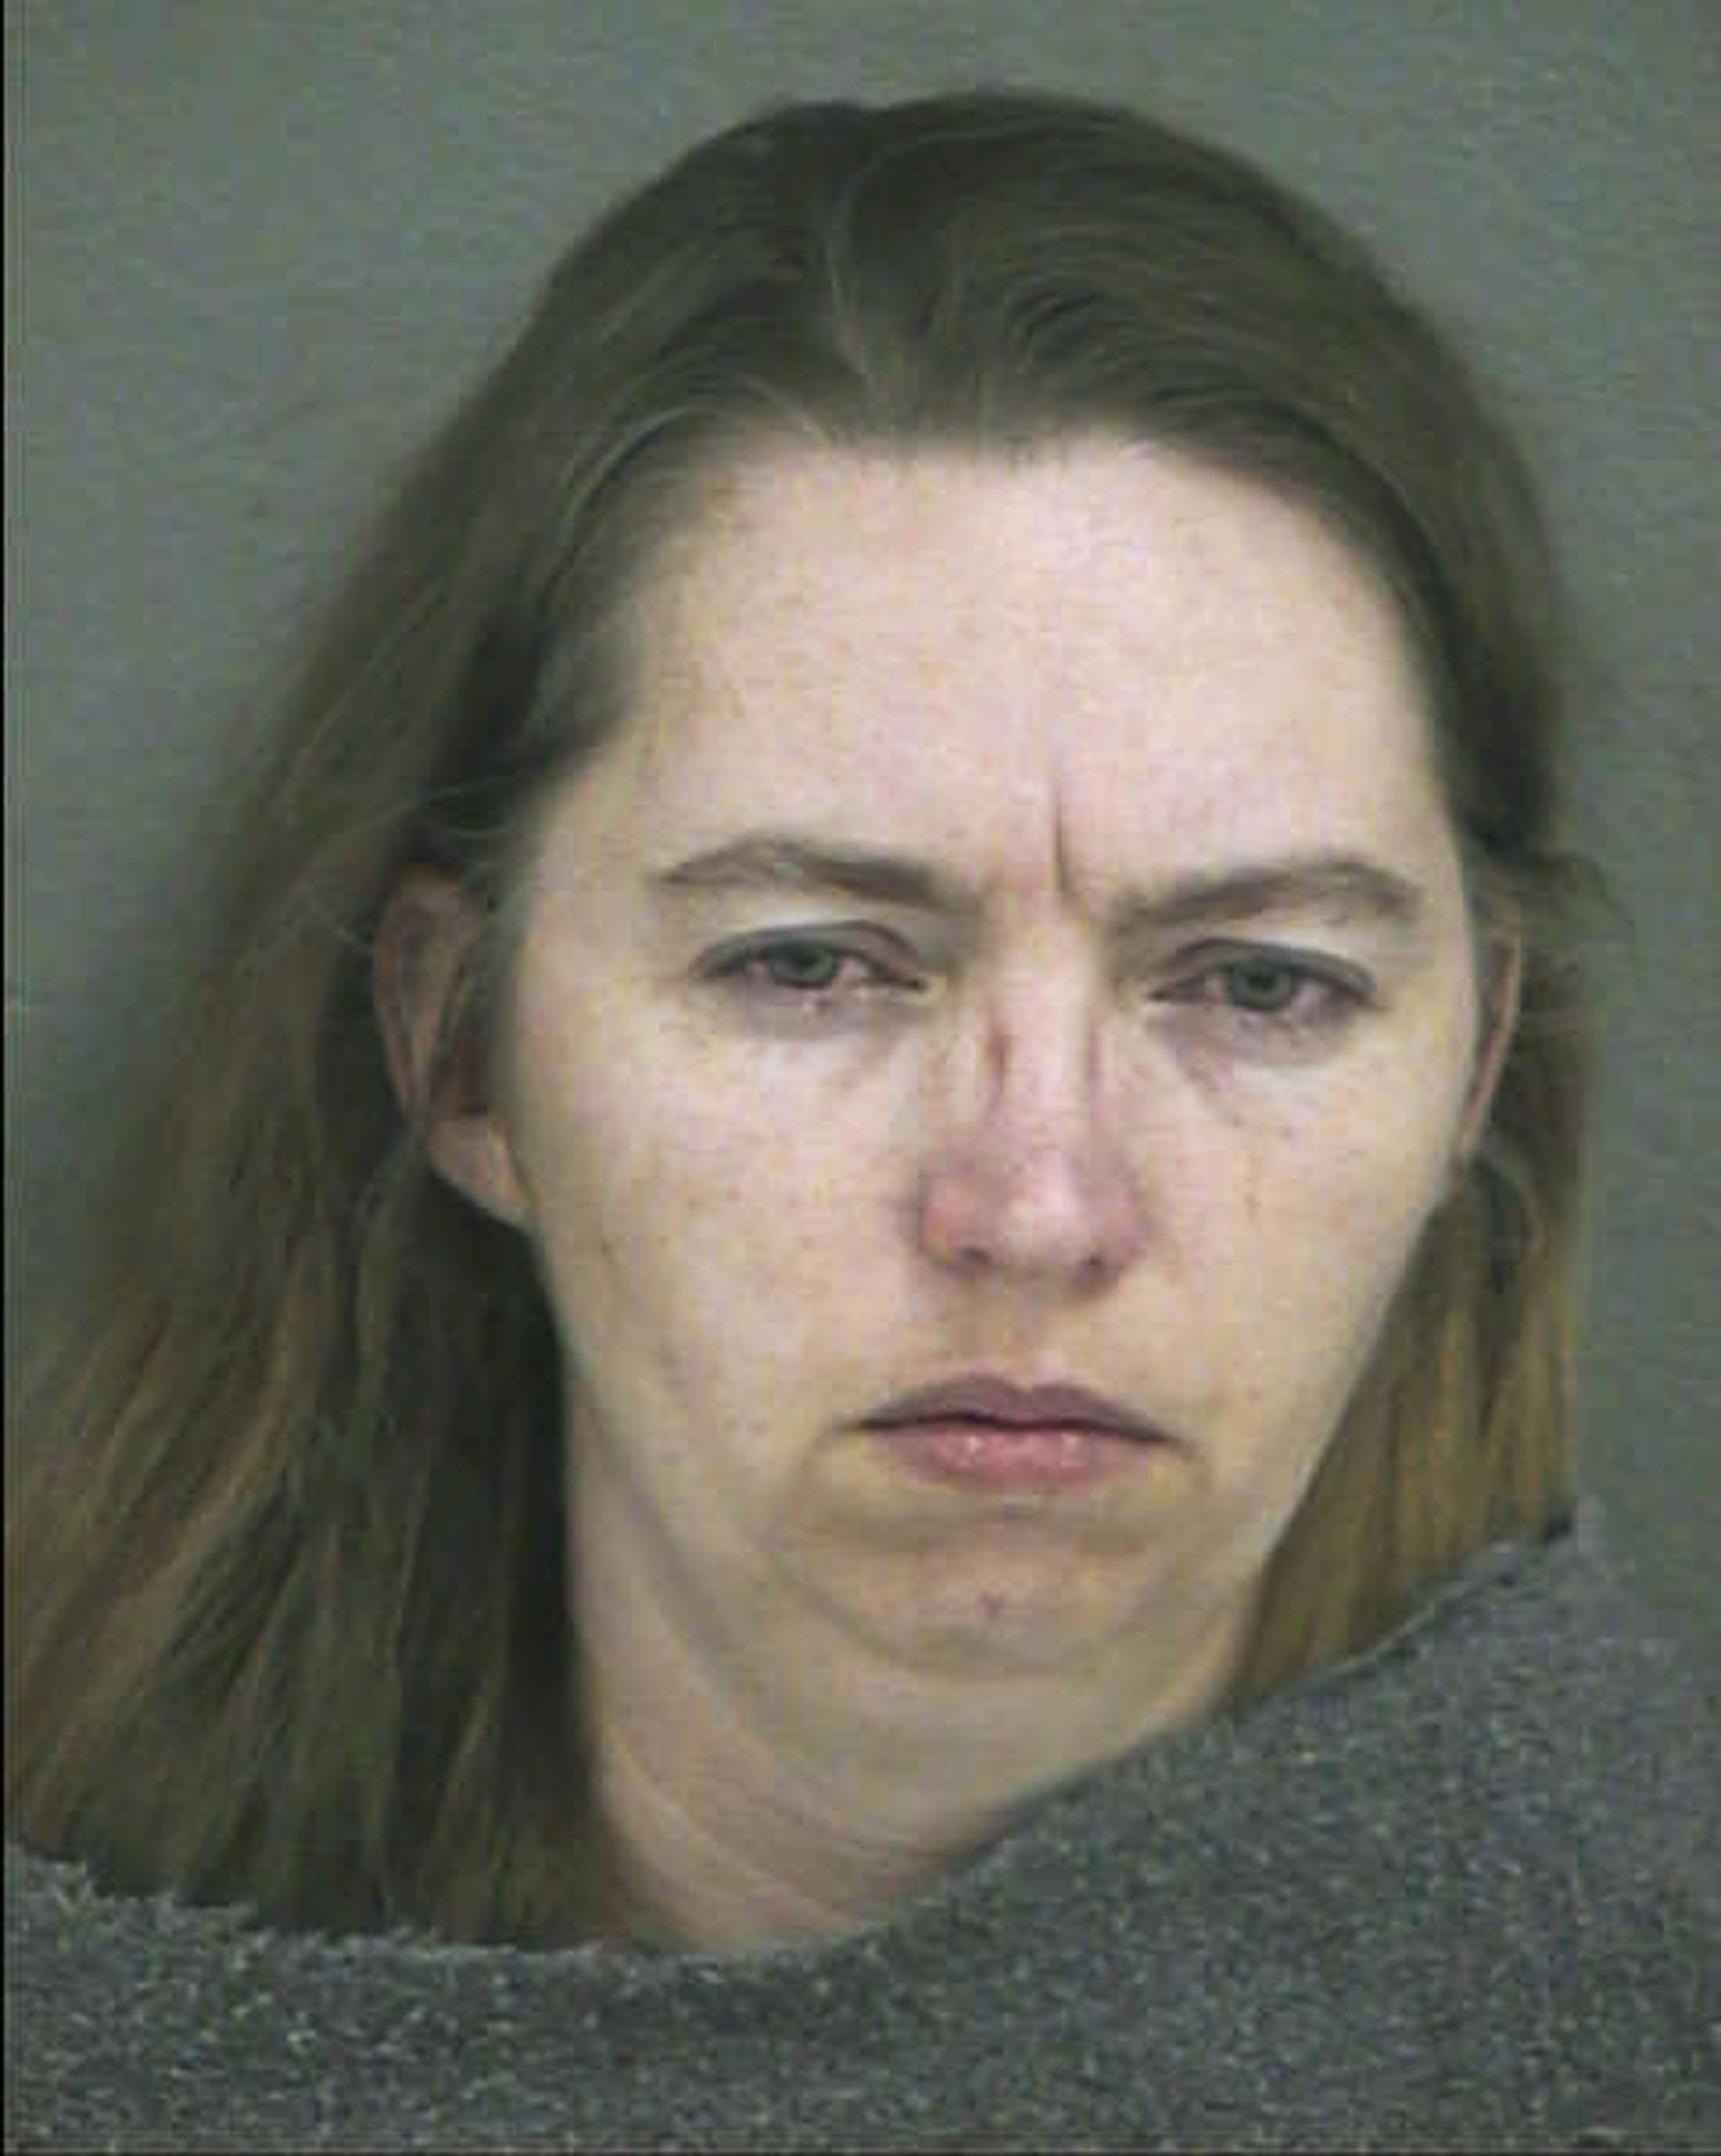 Lisa Montgomery Police Booking Photo